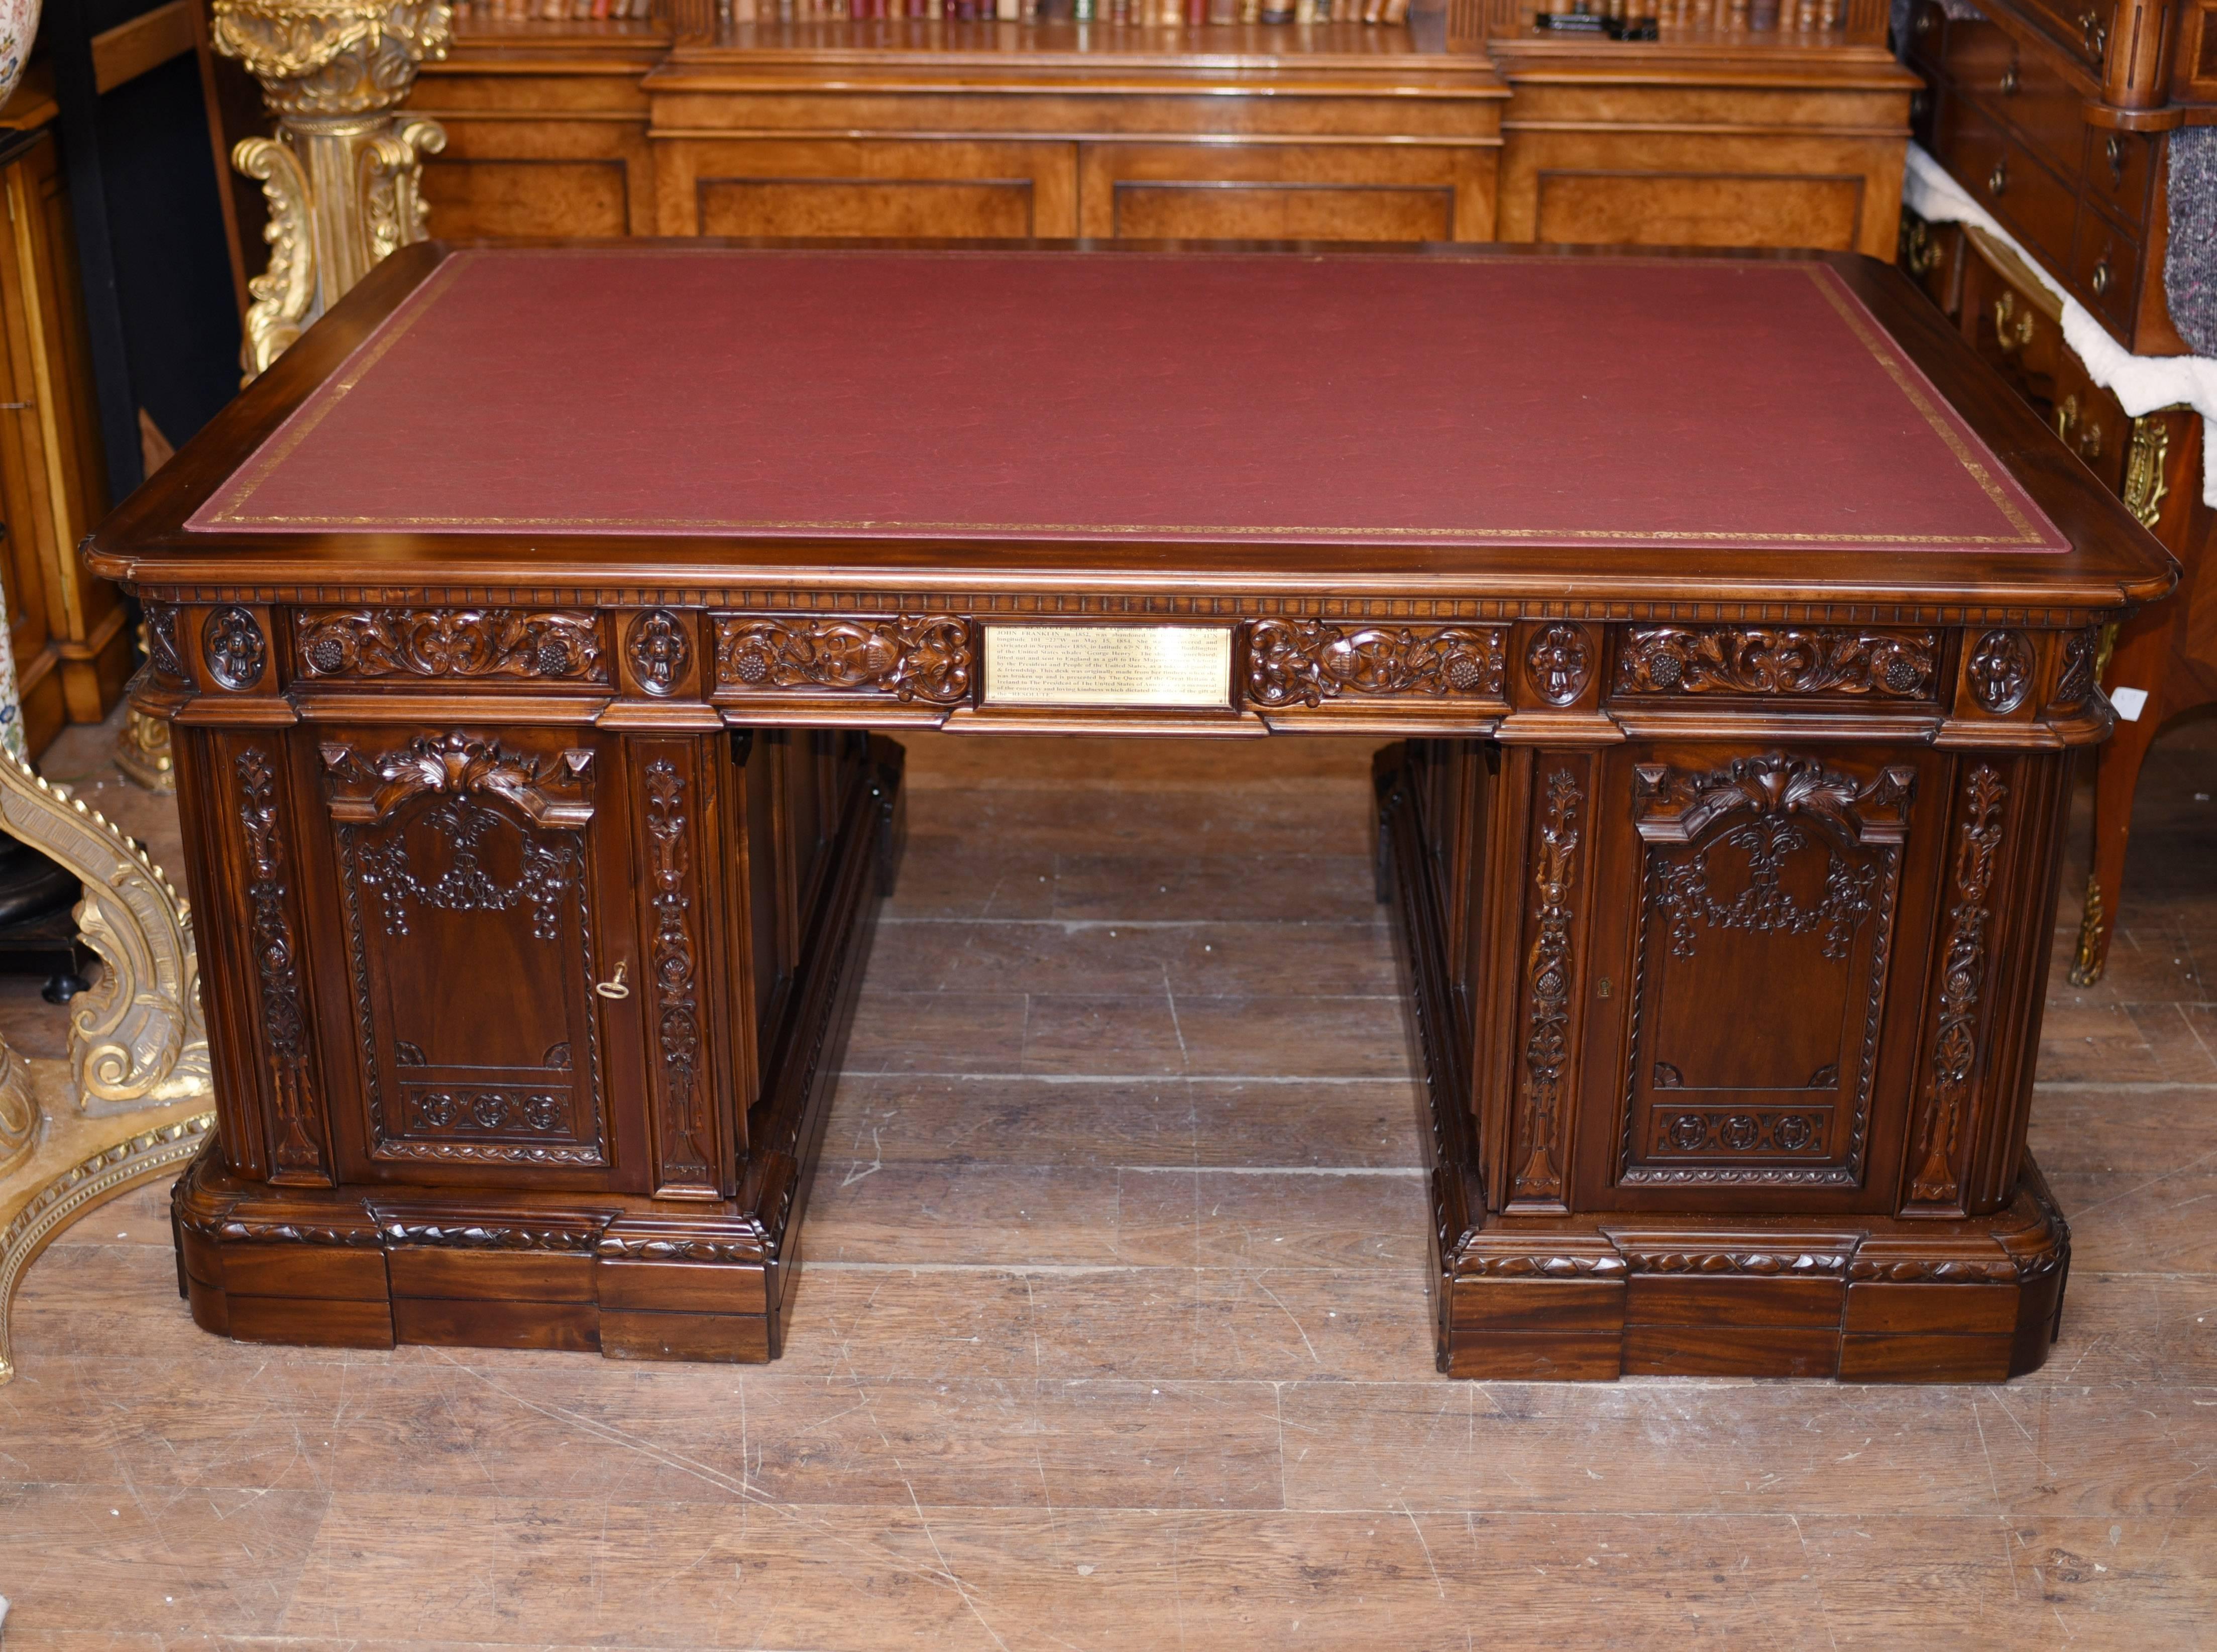 A 20th century replica of the white house presidents desk. The original to be found in the Oval office. This desk is made from the best quality mahogany and is profusely carved with various forms, including the large eagle with the shield, snake,